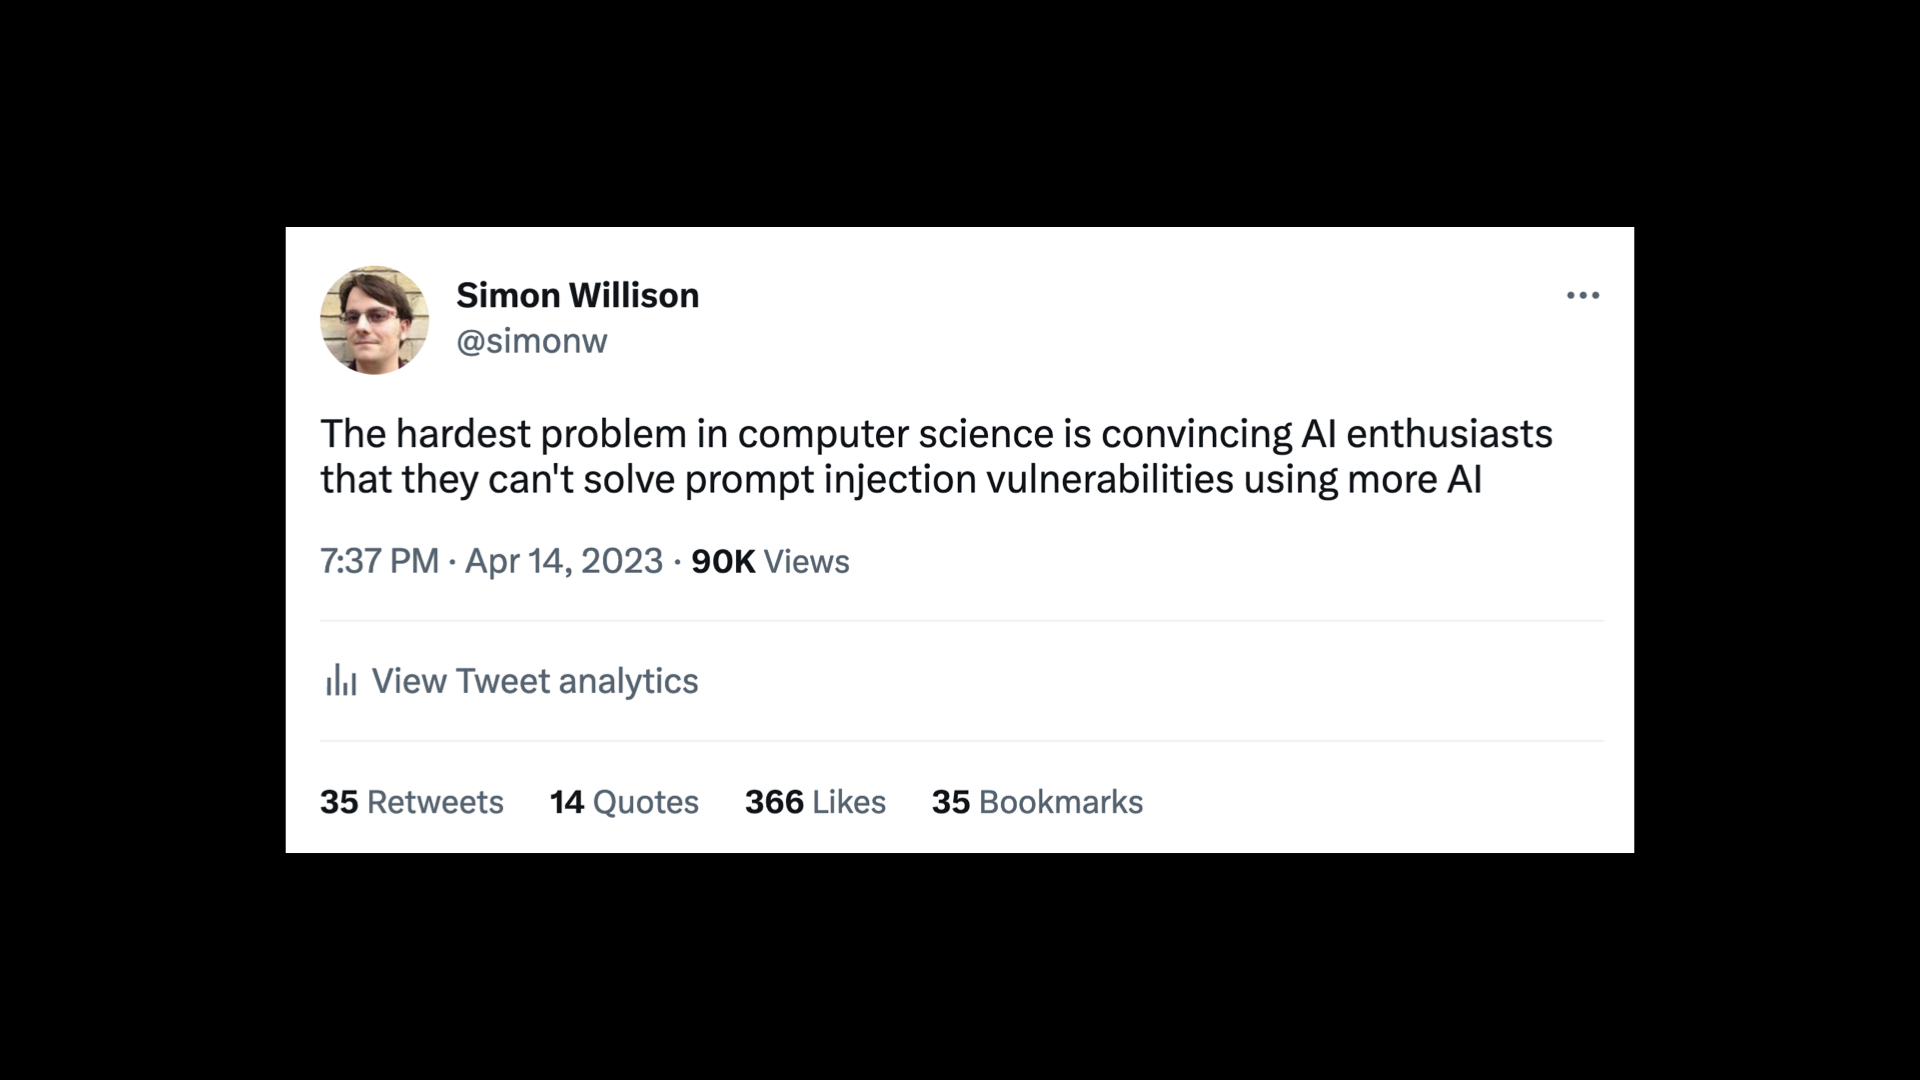 Tweet from @simonw: The hardest problem in computer science is convincing AI enthusiasts that they can't solve prompt injection vulnerabilities using more AI - 90K views, 25 retweets, 14 quotes, 366 likes.